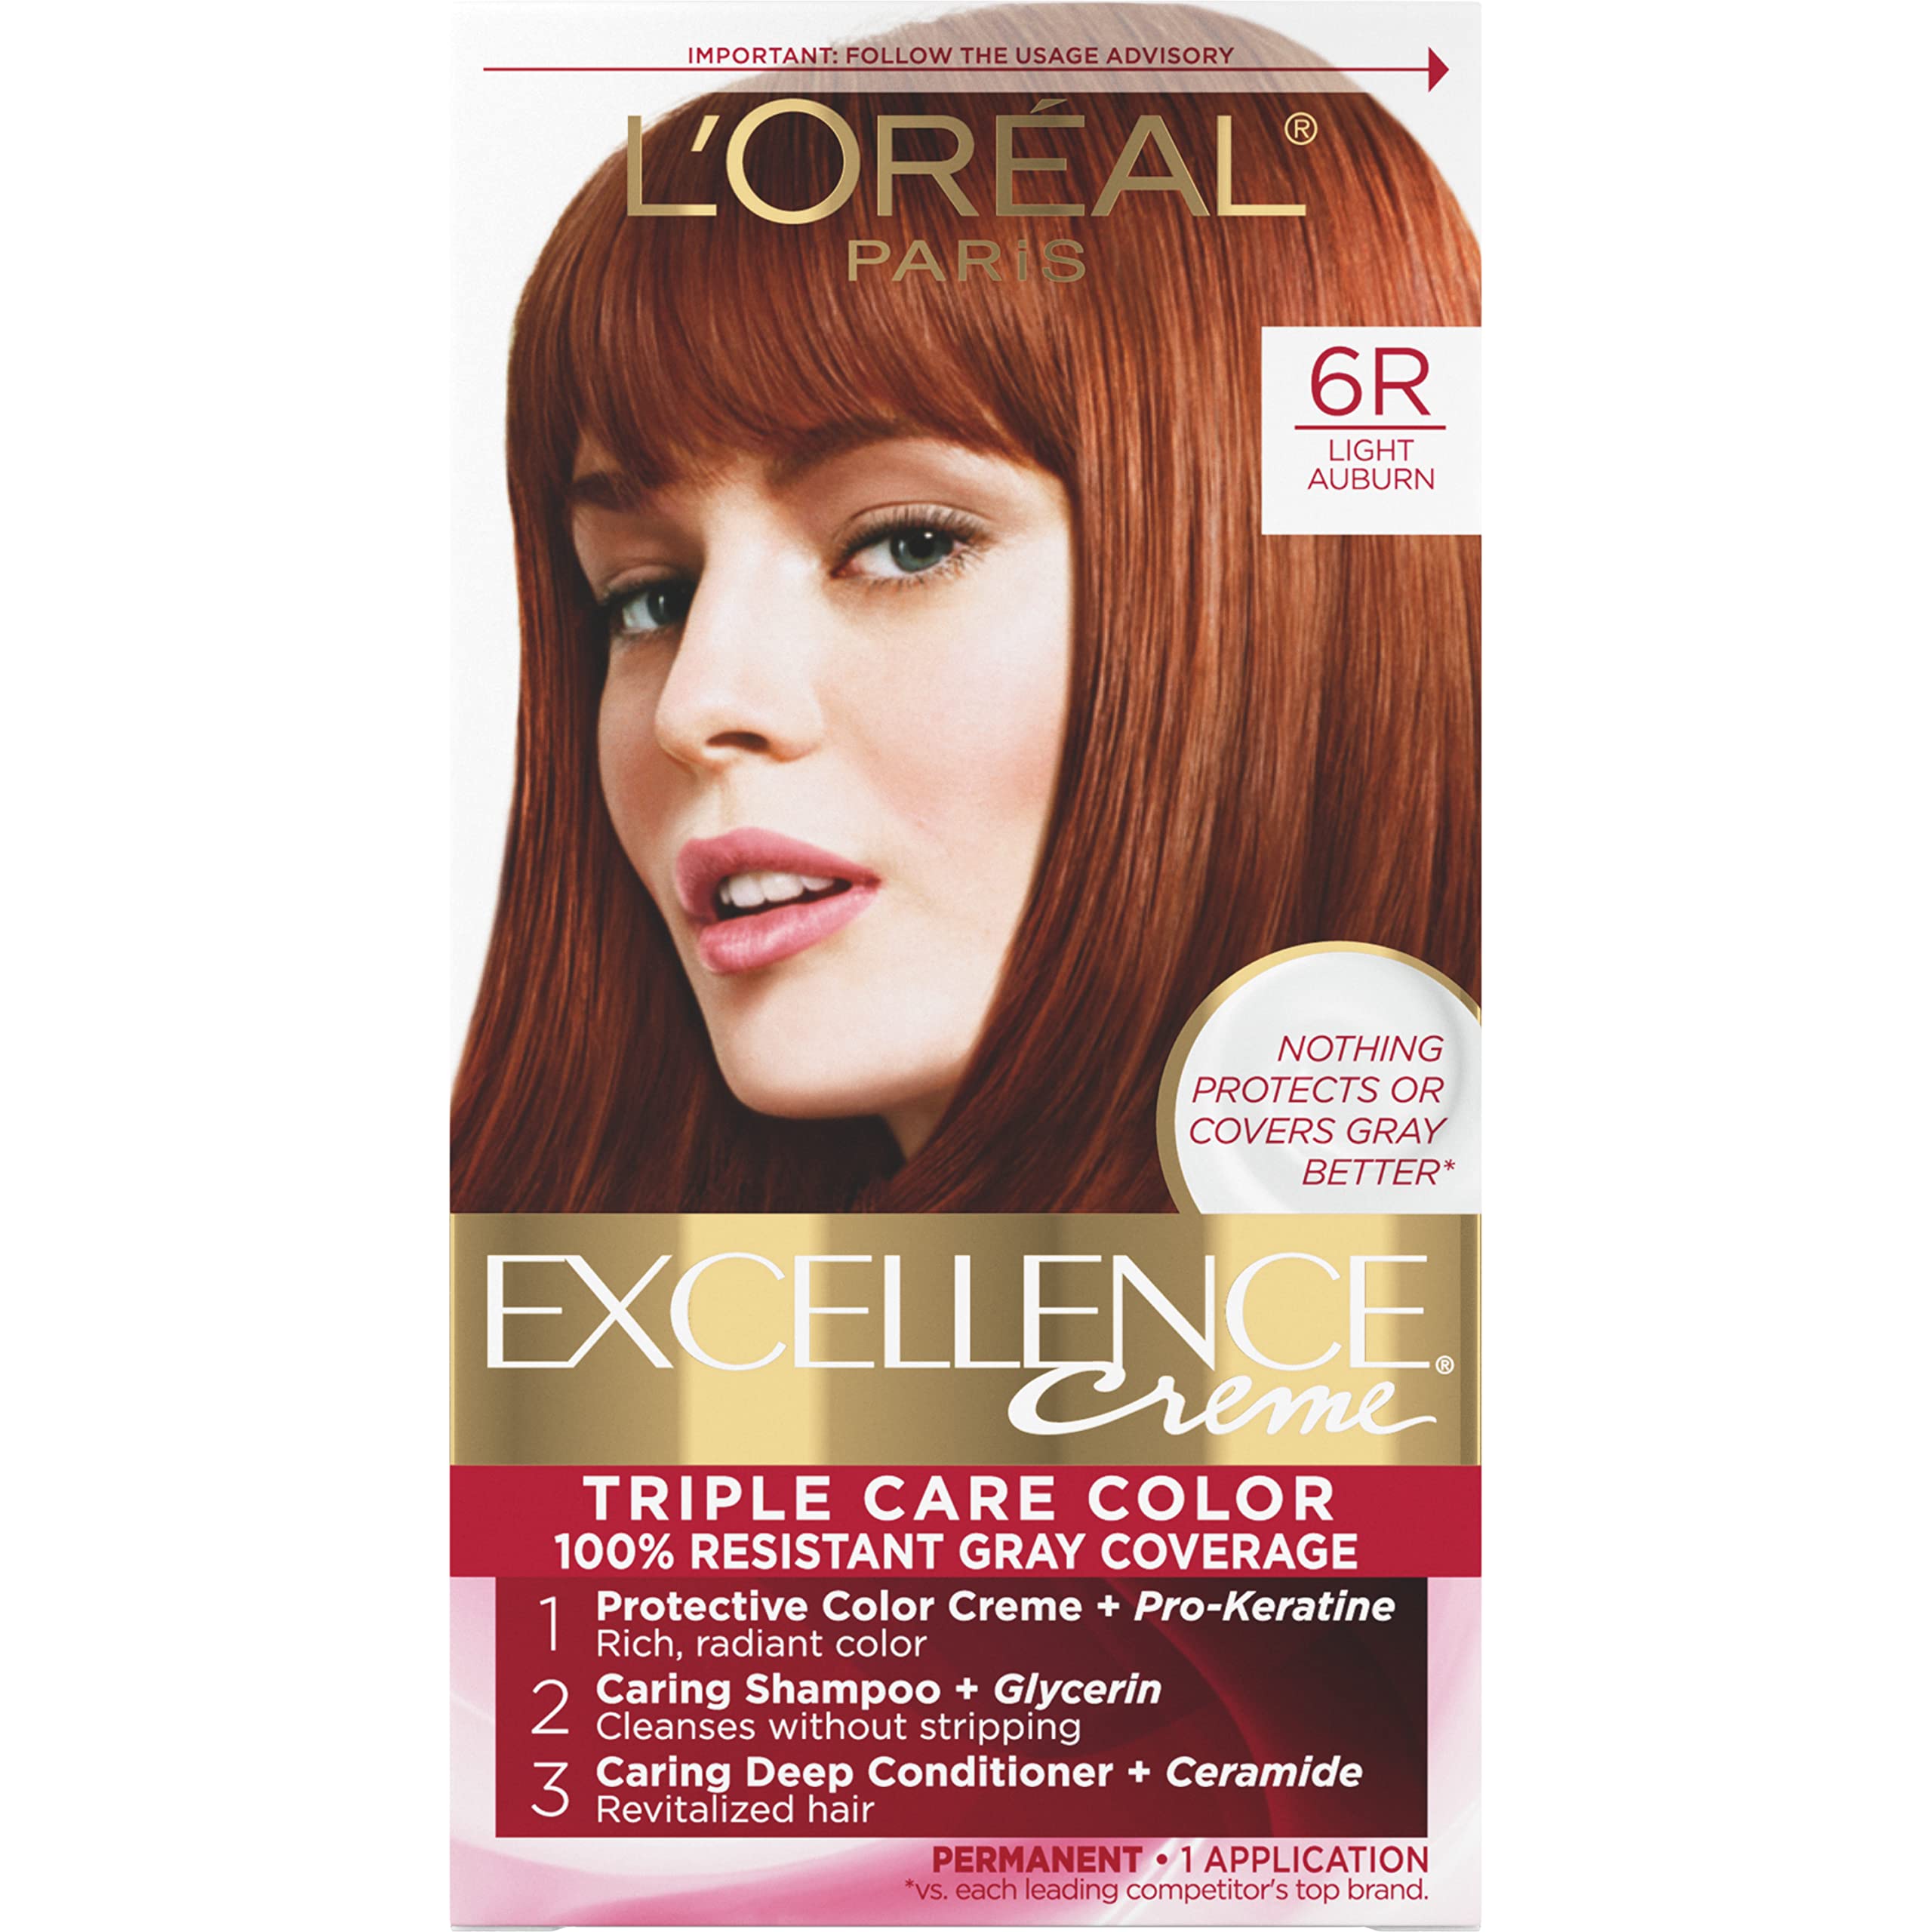 L'Oreal Paris Excellence Creme Permanent Triple Care Hair Color, 6R Light Auburn, Gray Coverage For Up to 8 Weeks, All Hair Types, Pack of 1